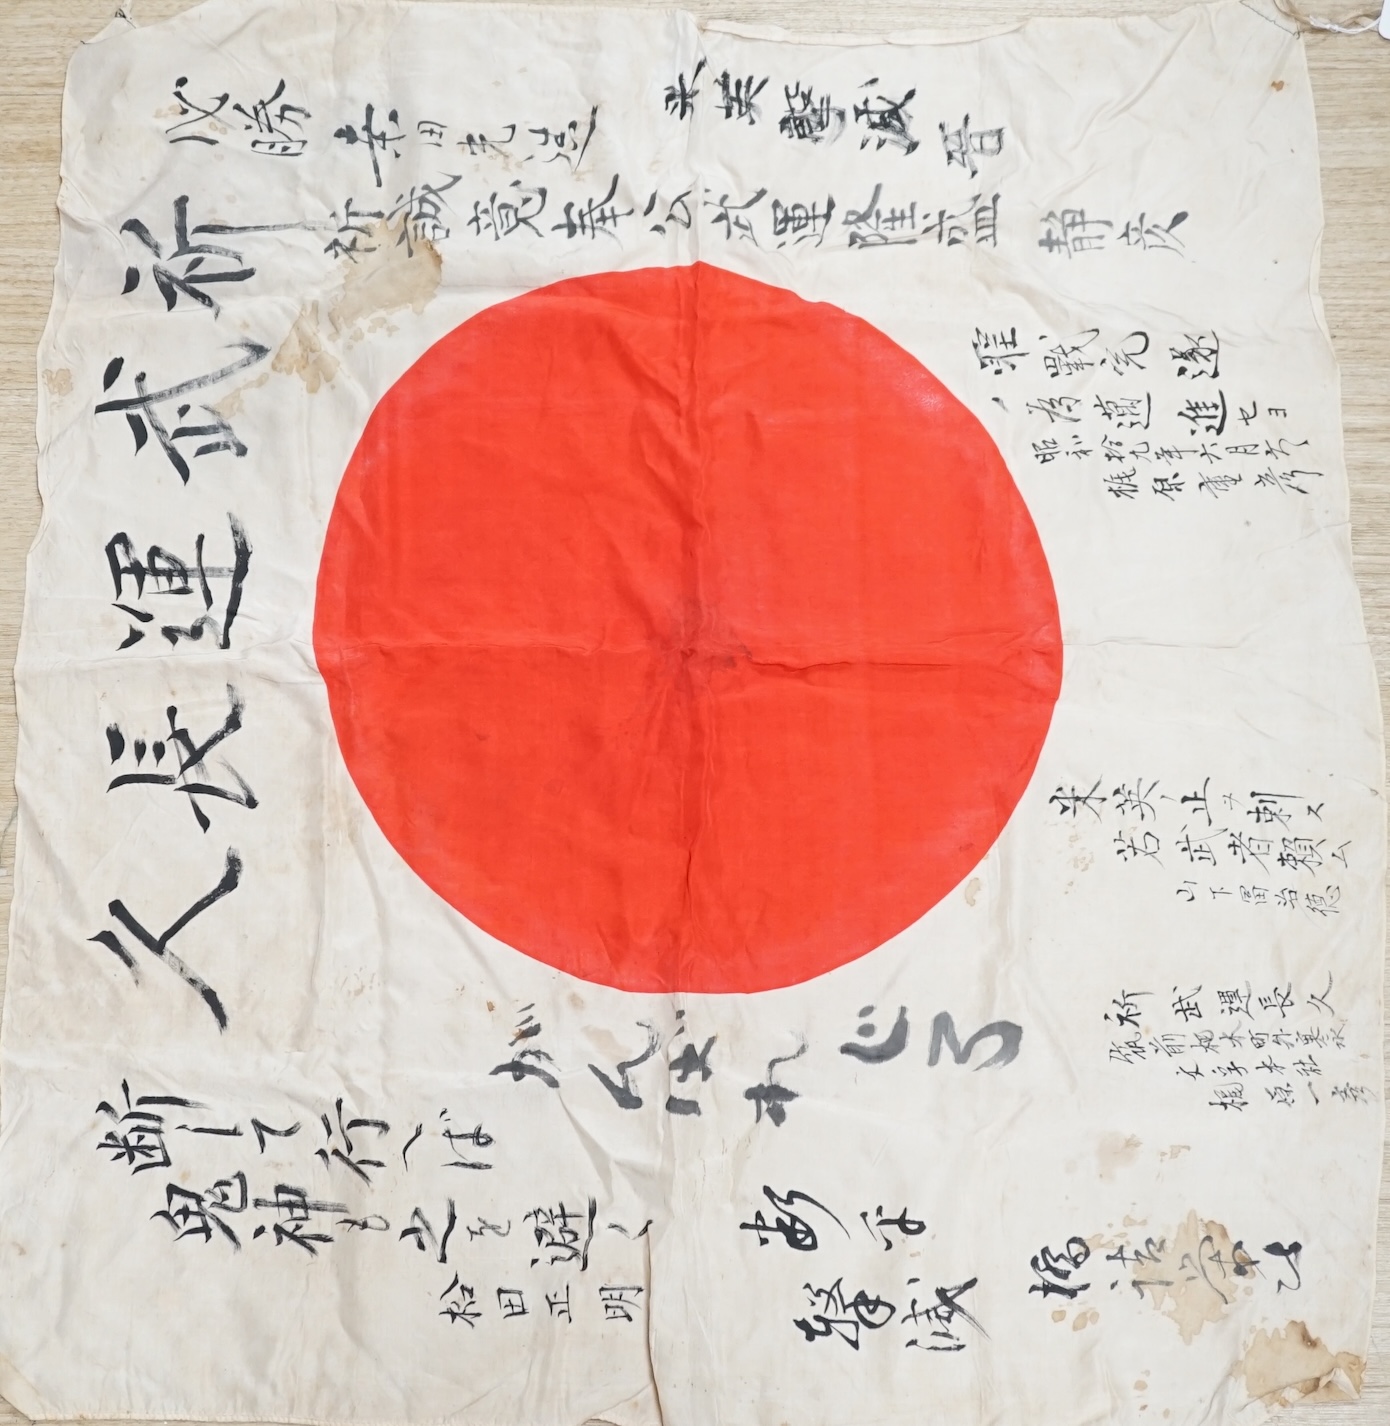 A WWII Japanese signed silk prayer flag, 83 x 73cm. Condition - fair, significant staining in some areas